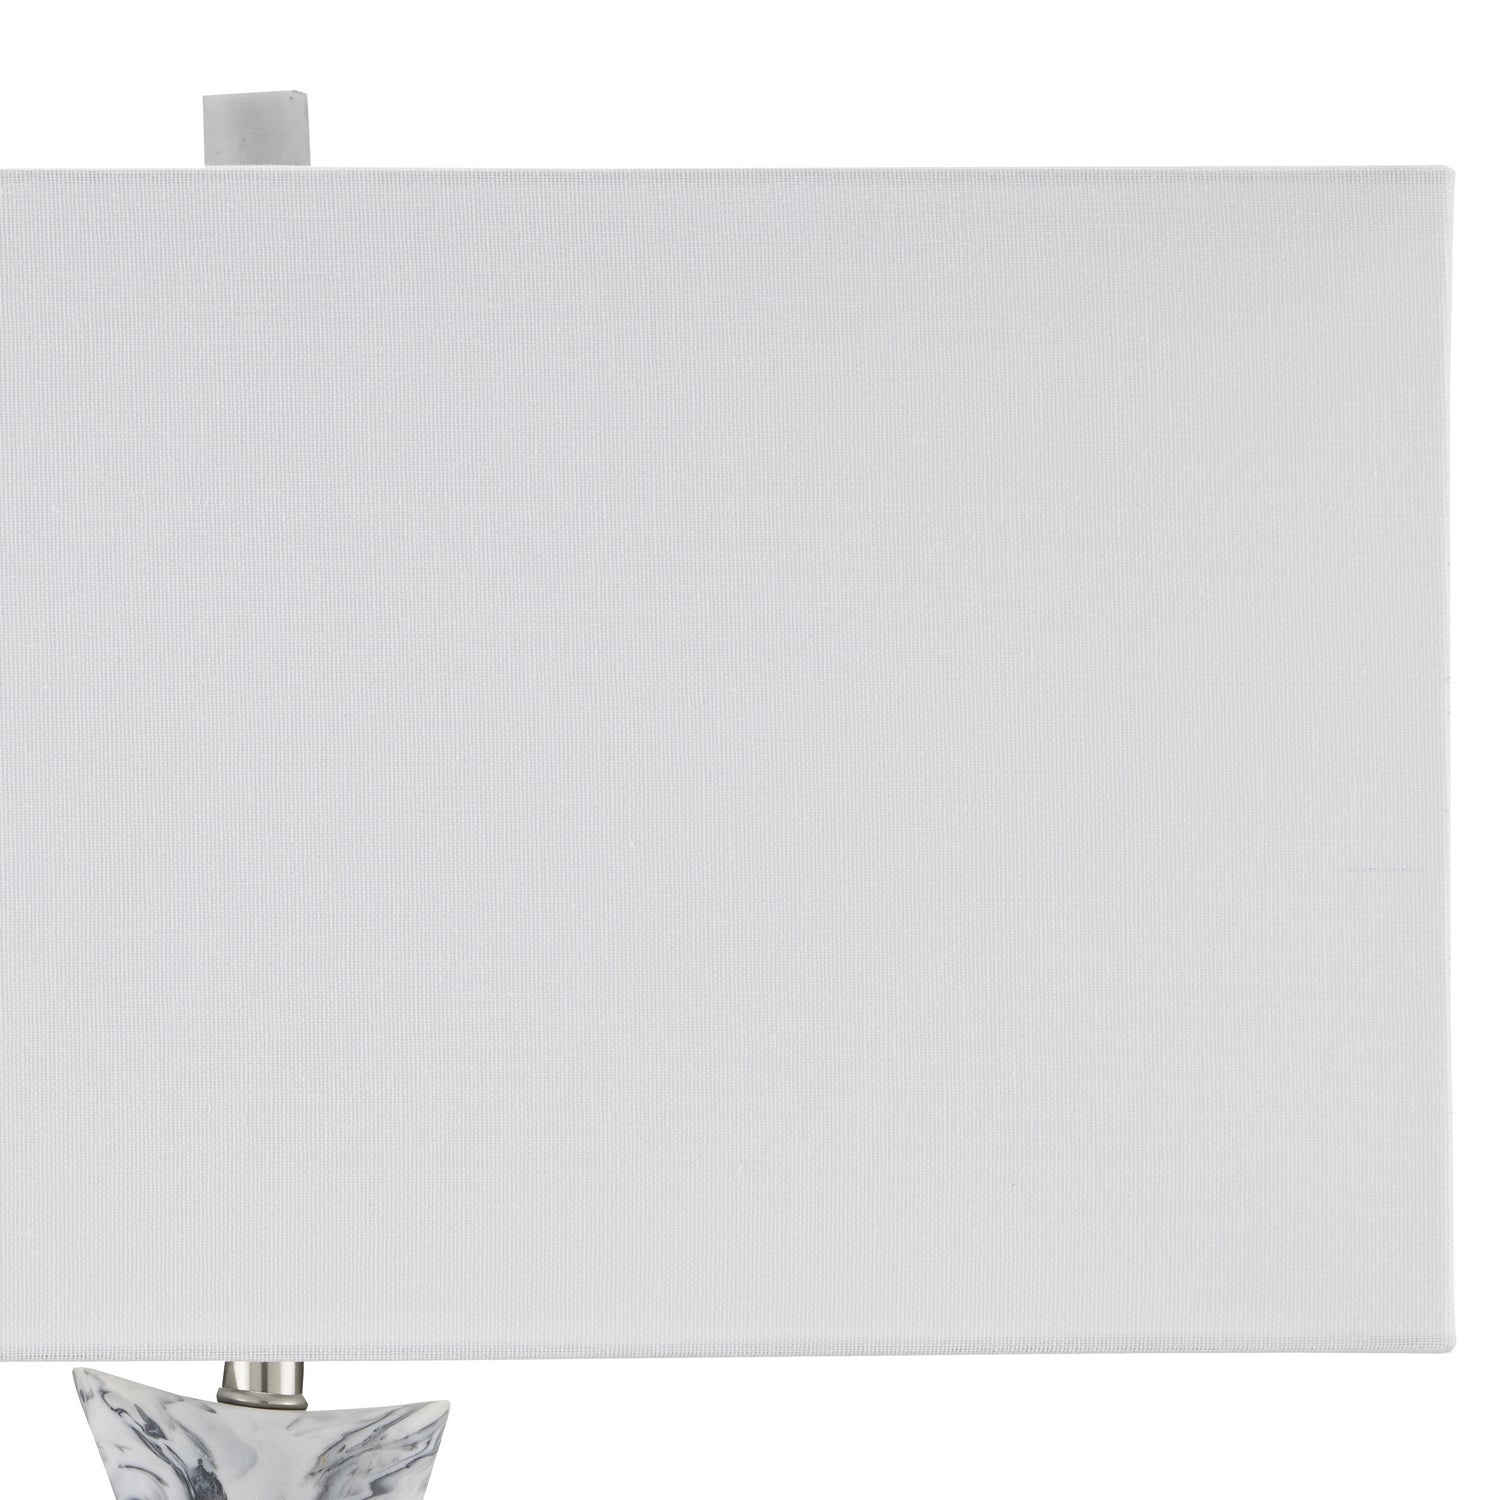 One Light Table Lamp from the Devant collection in White/Gray/Black finish